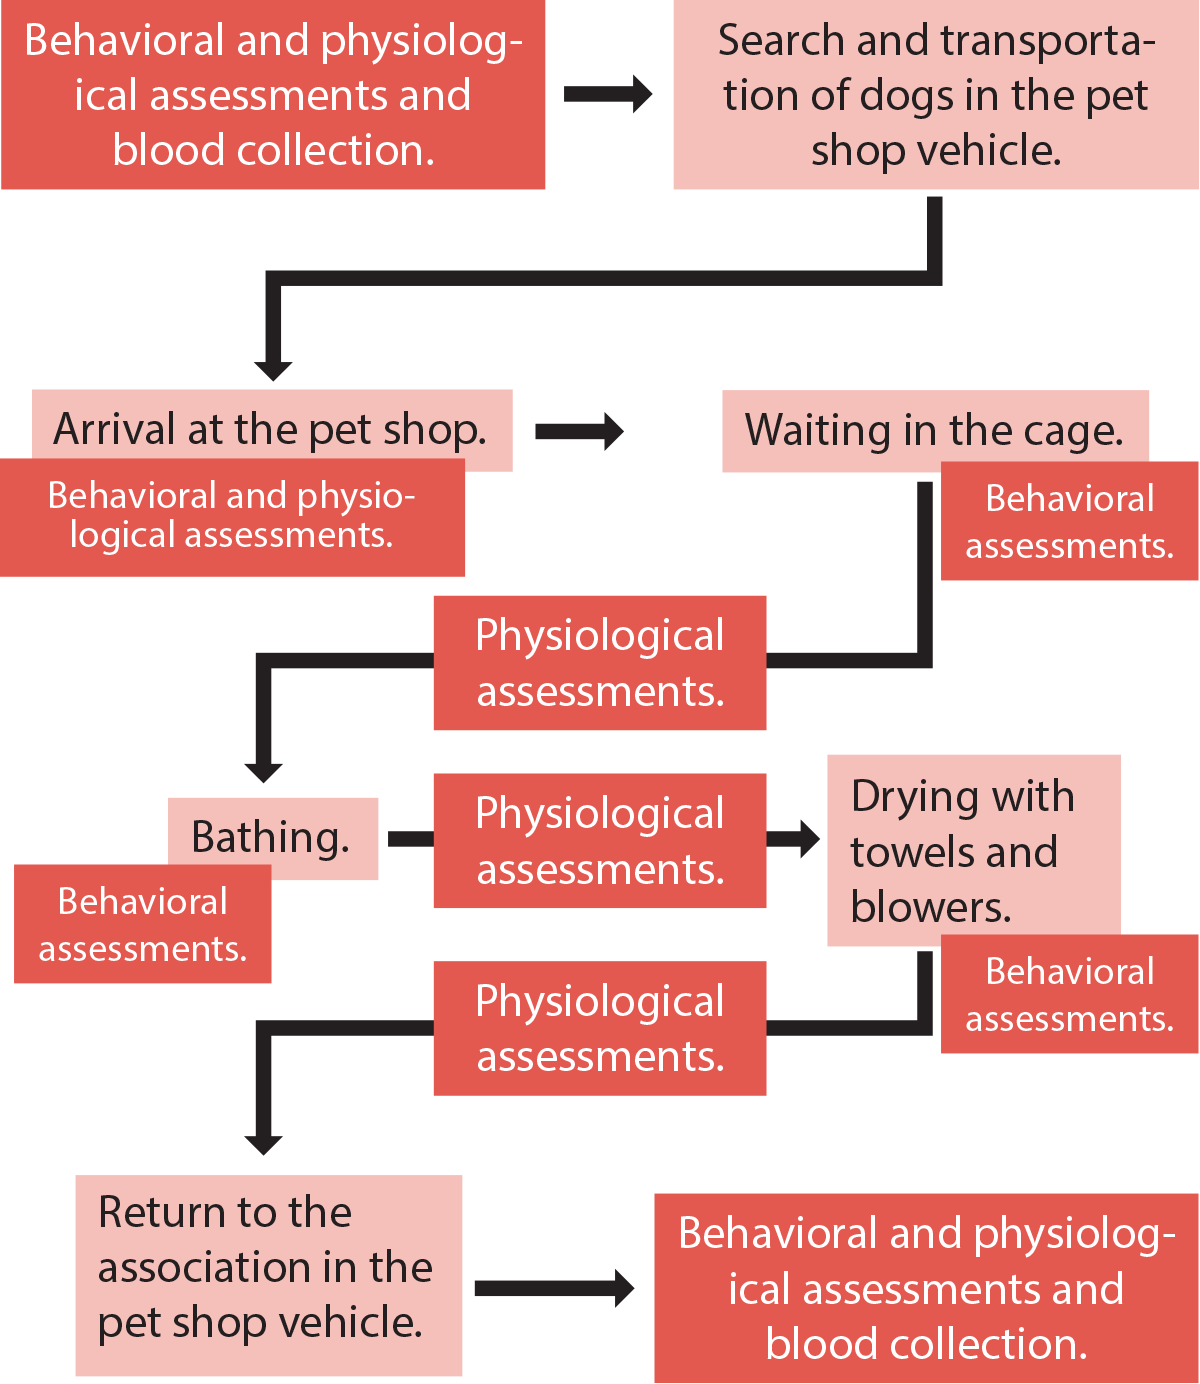 chart showing the steps for the behavioral and physiological assessments and blood collection cycle